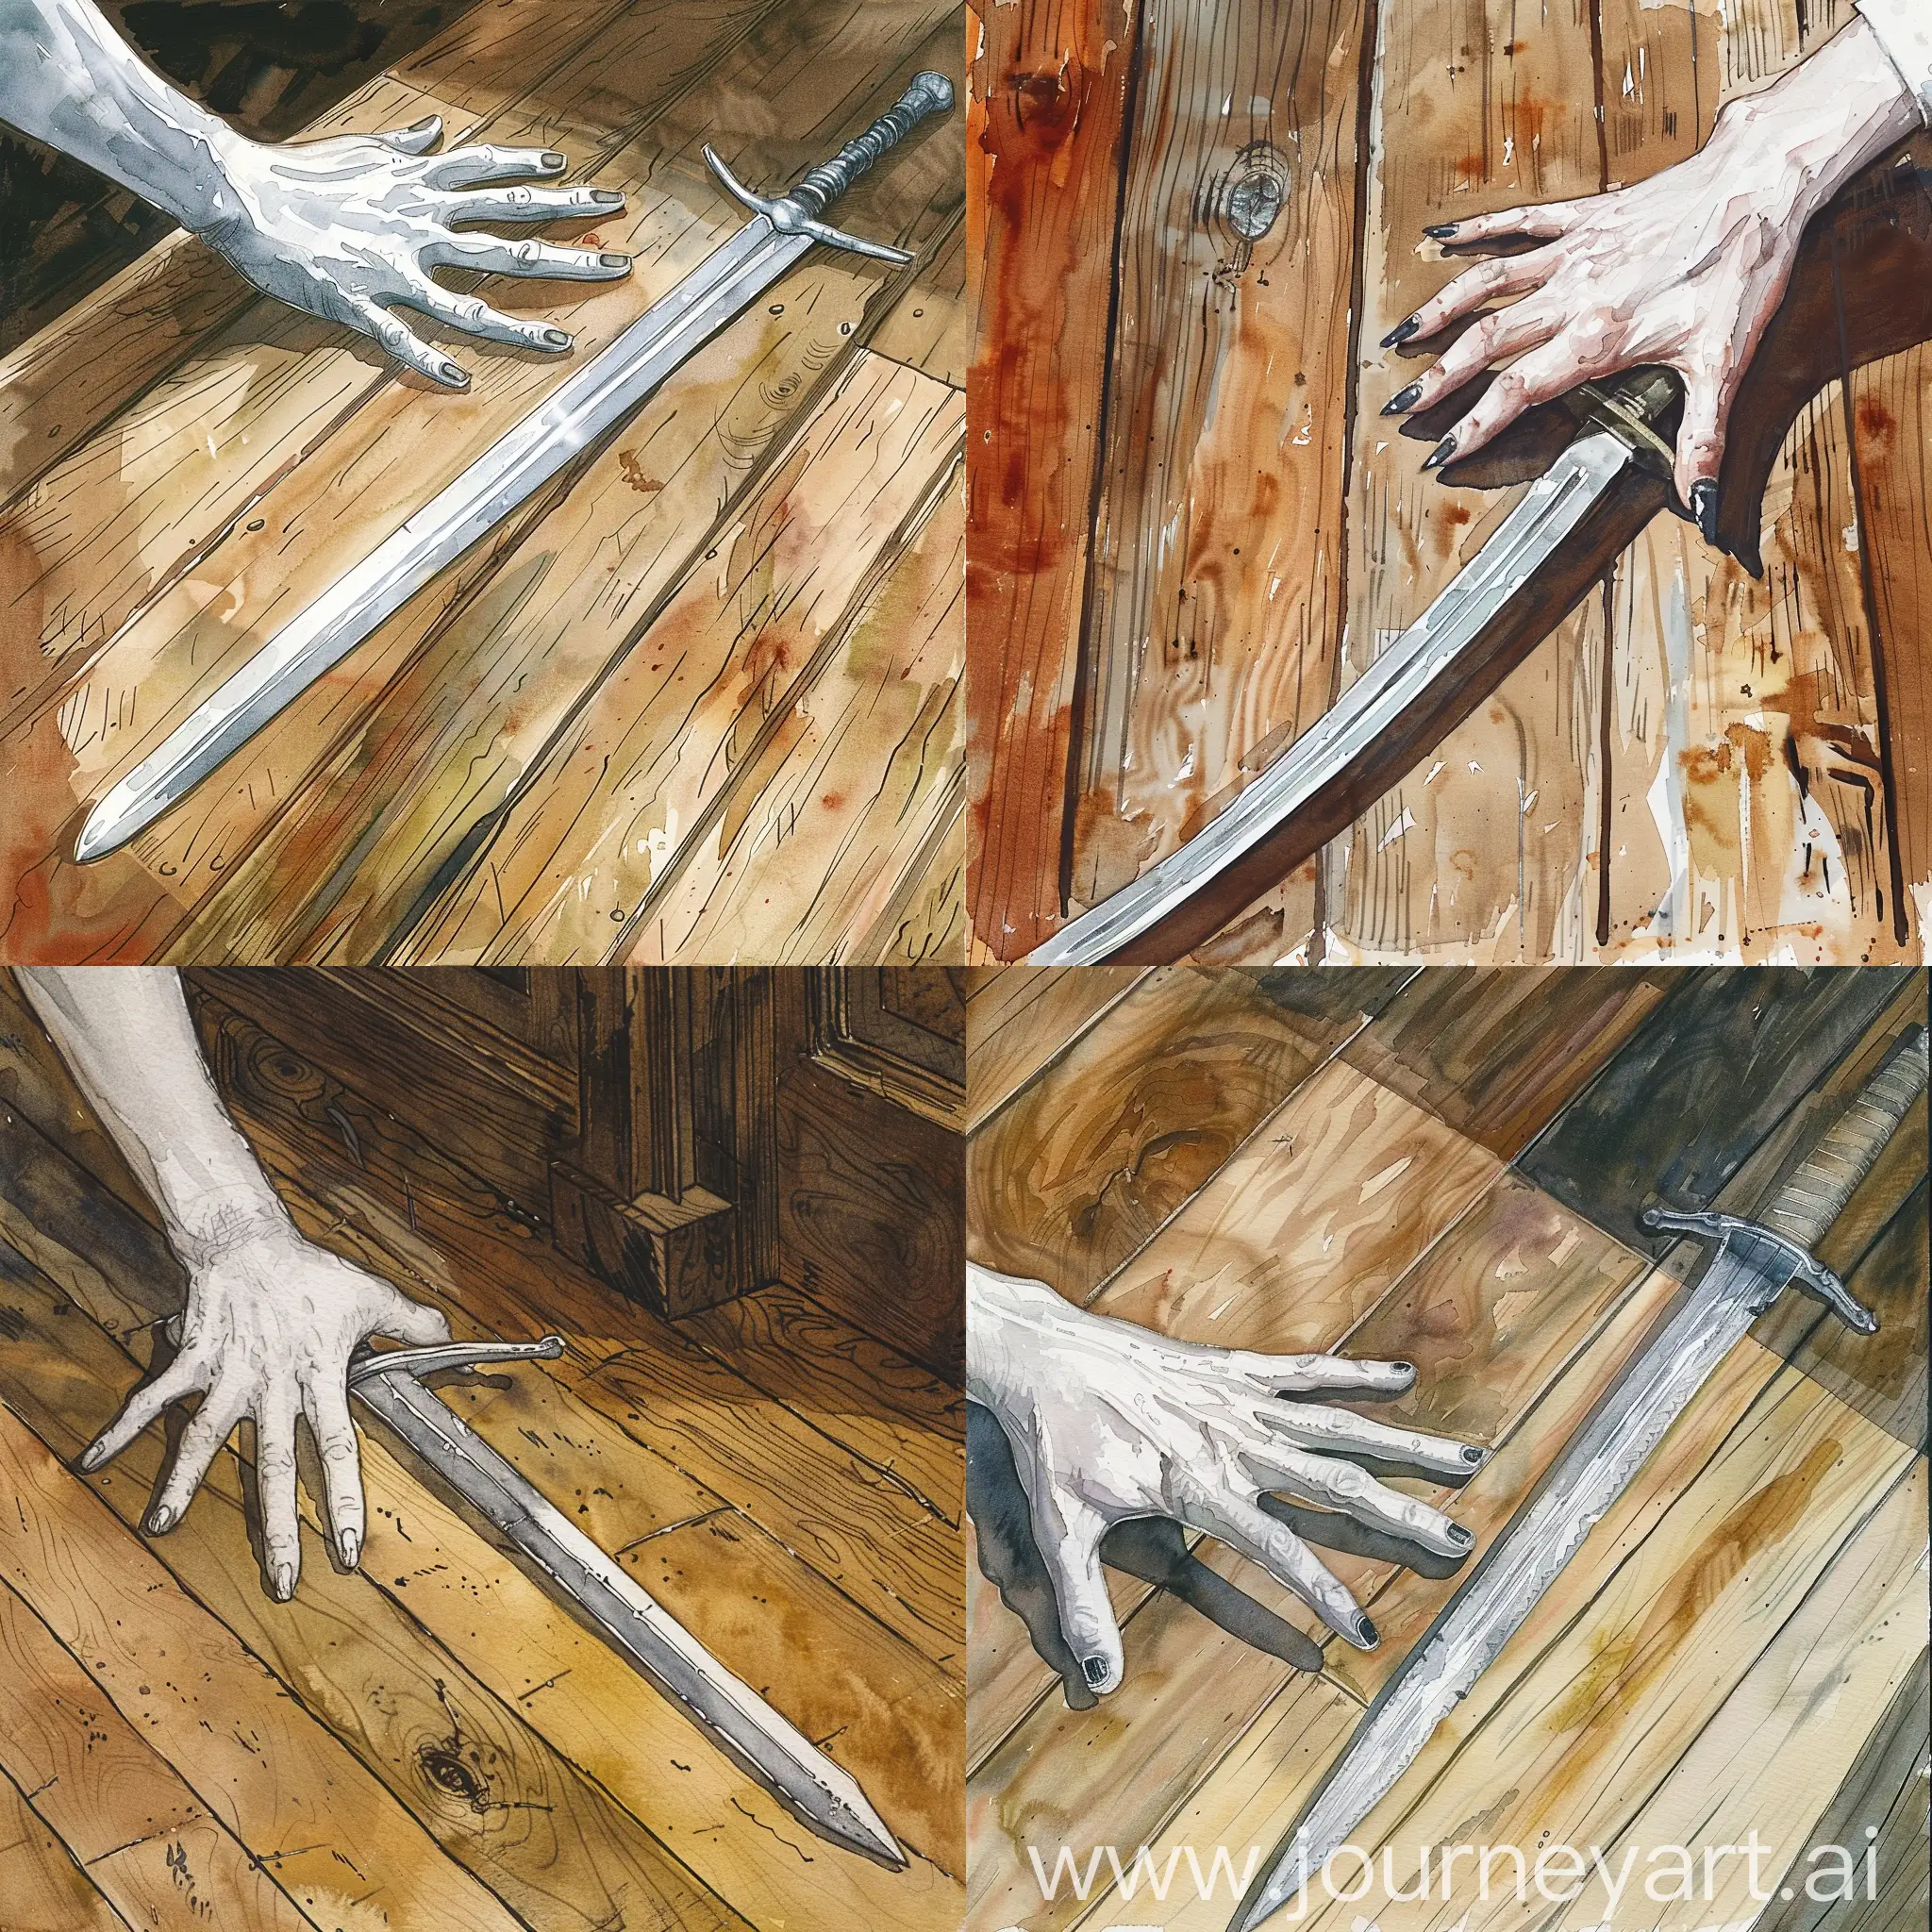 silver sword lying on a wooden floor near a pale white hand with short black fingernails, watercolor